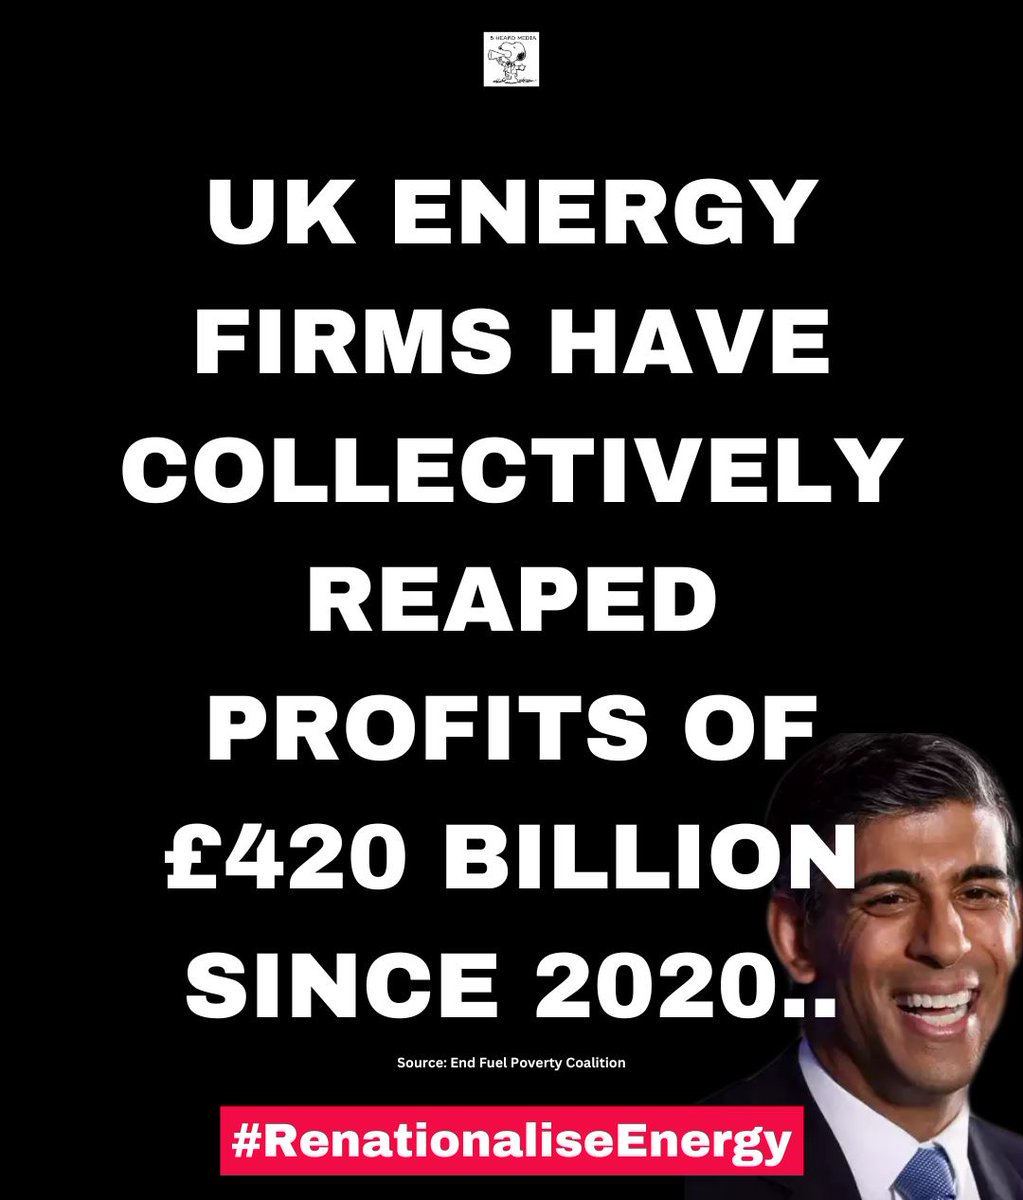 UK energy firms have collectively reaped profits of £420 billion since 2020, according to research by the End Fuel Poverty Coalition.

6.5 million UK households are in fuel poverty, more than 20% of all UK households

#RishiSunak
#Greedflation
#EndFuelPoverty
#RenationaliseEnergy